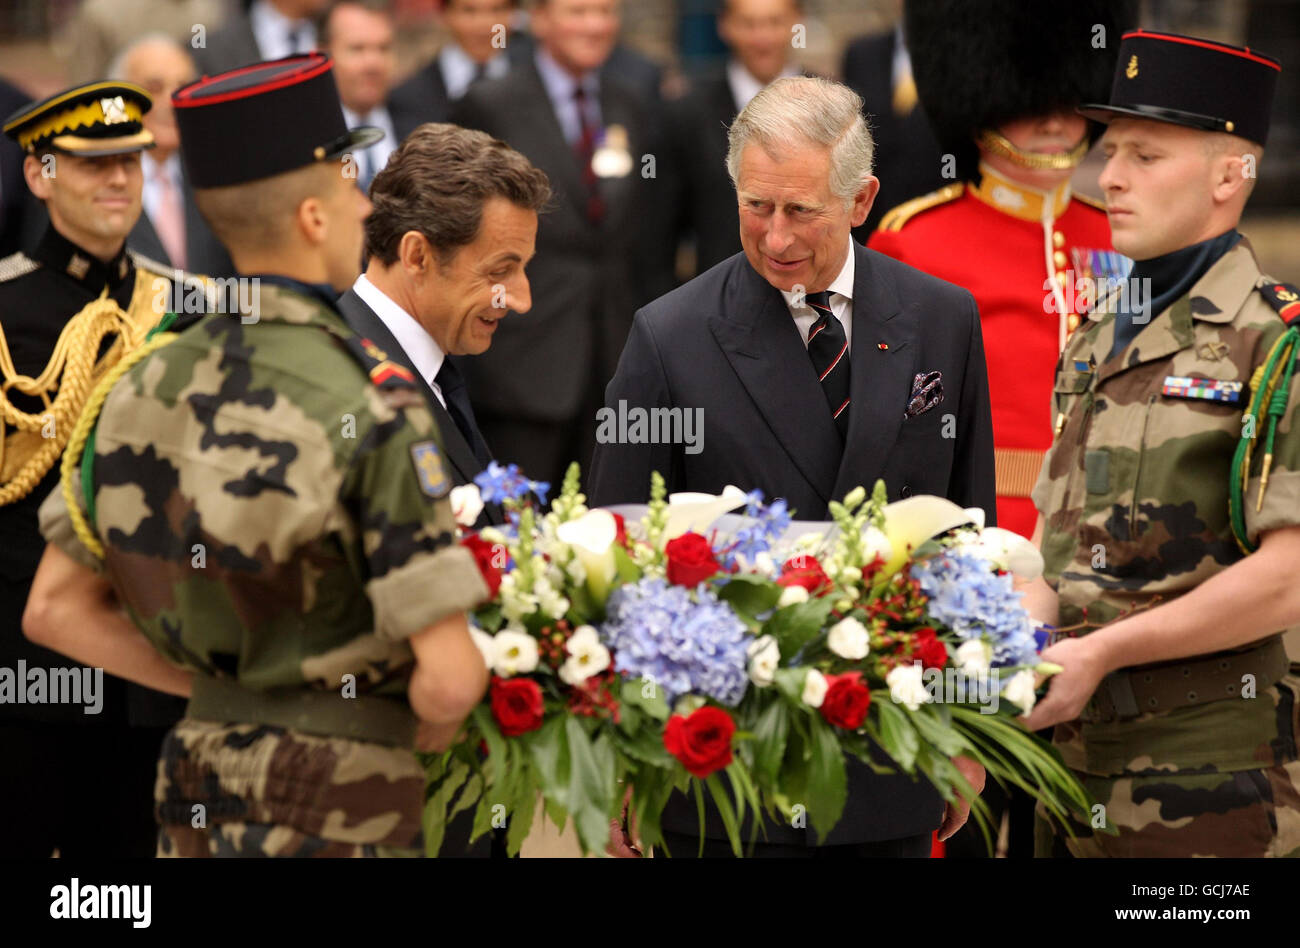 The Prince of Wales (right) and French President Nicolas Sarkozy prepare to lay a wreath at the statues of HM King George VI and HM Queen Elizabeth on the Mall in London. Stock Photo